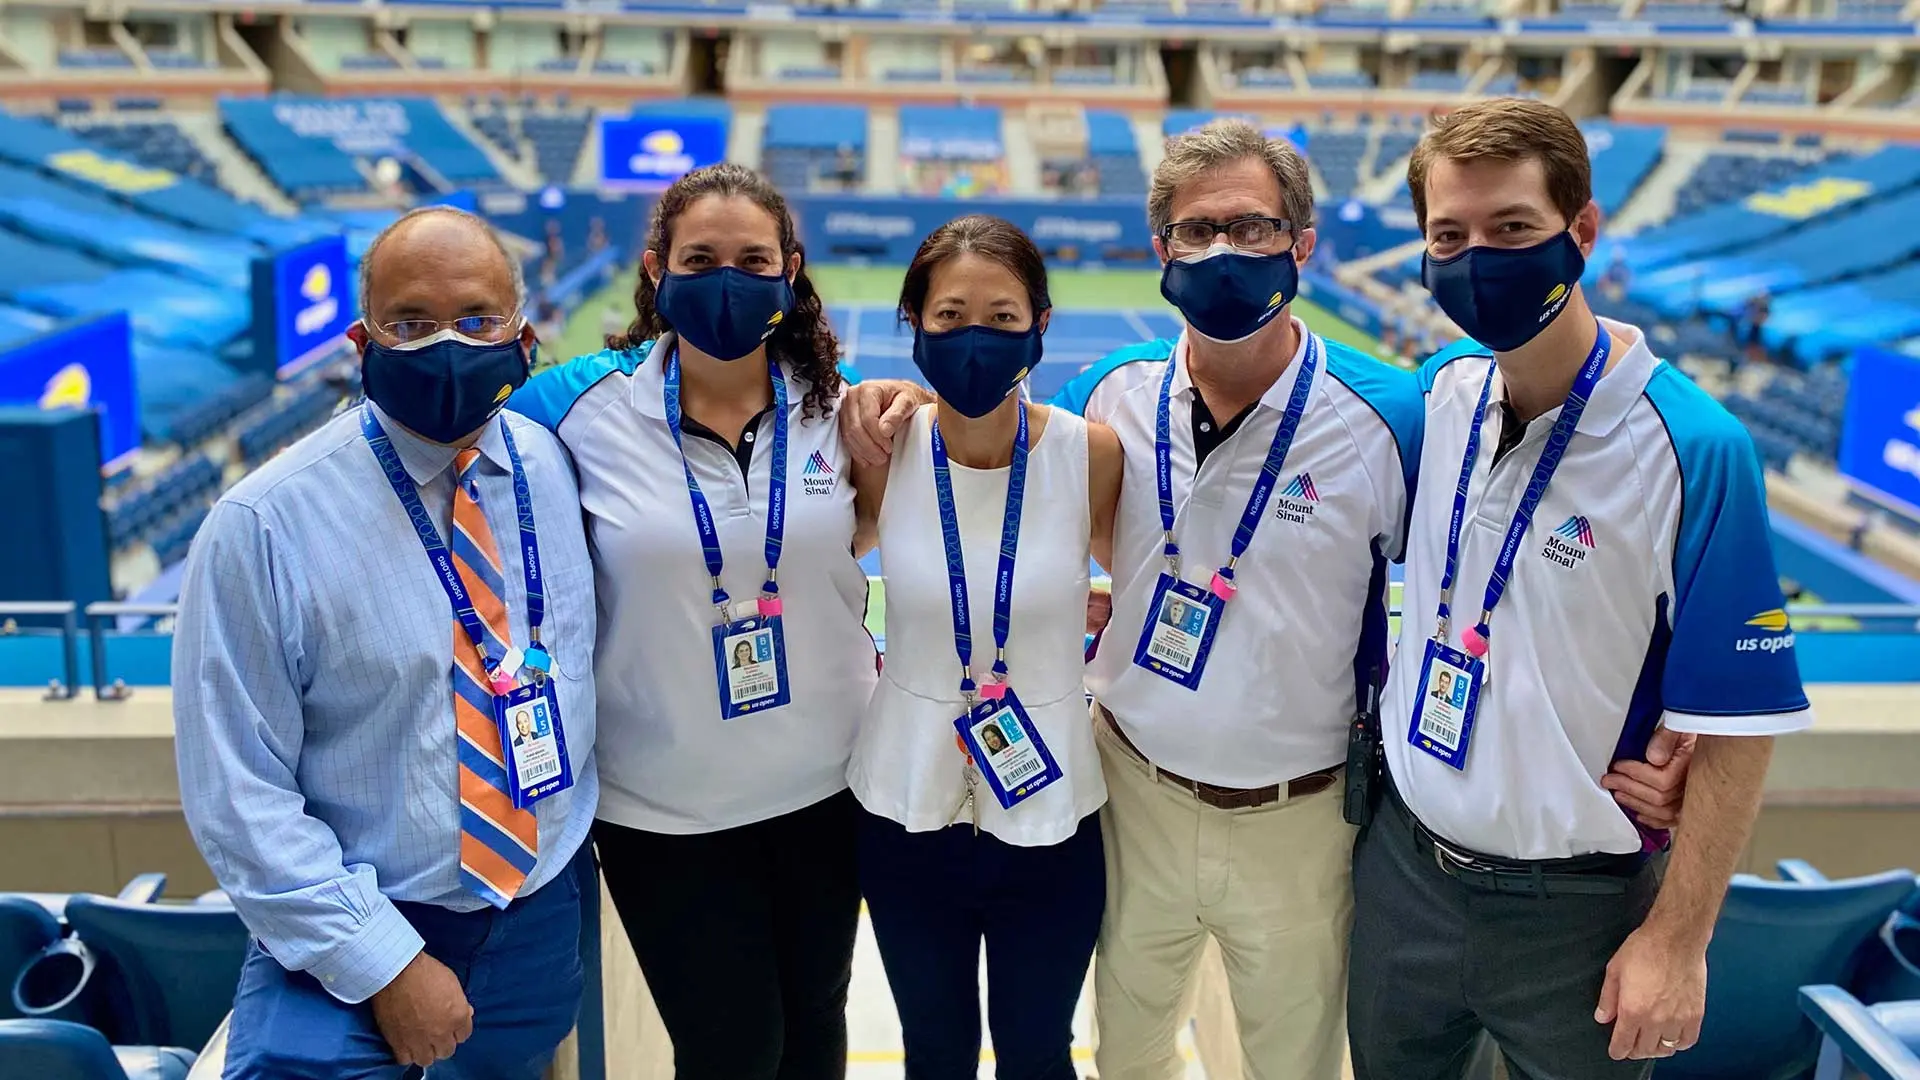 How Orthopedists Tackled COVID-19 at the US Open Tennis Championship